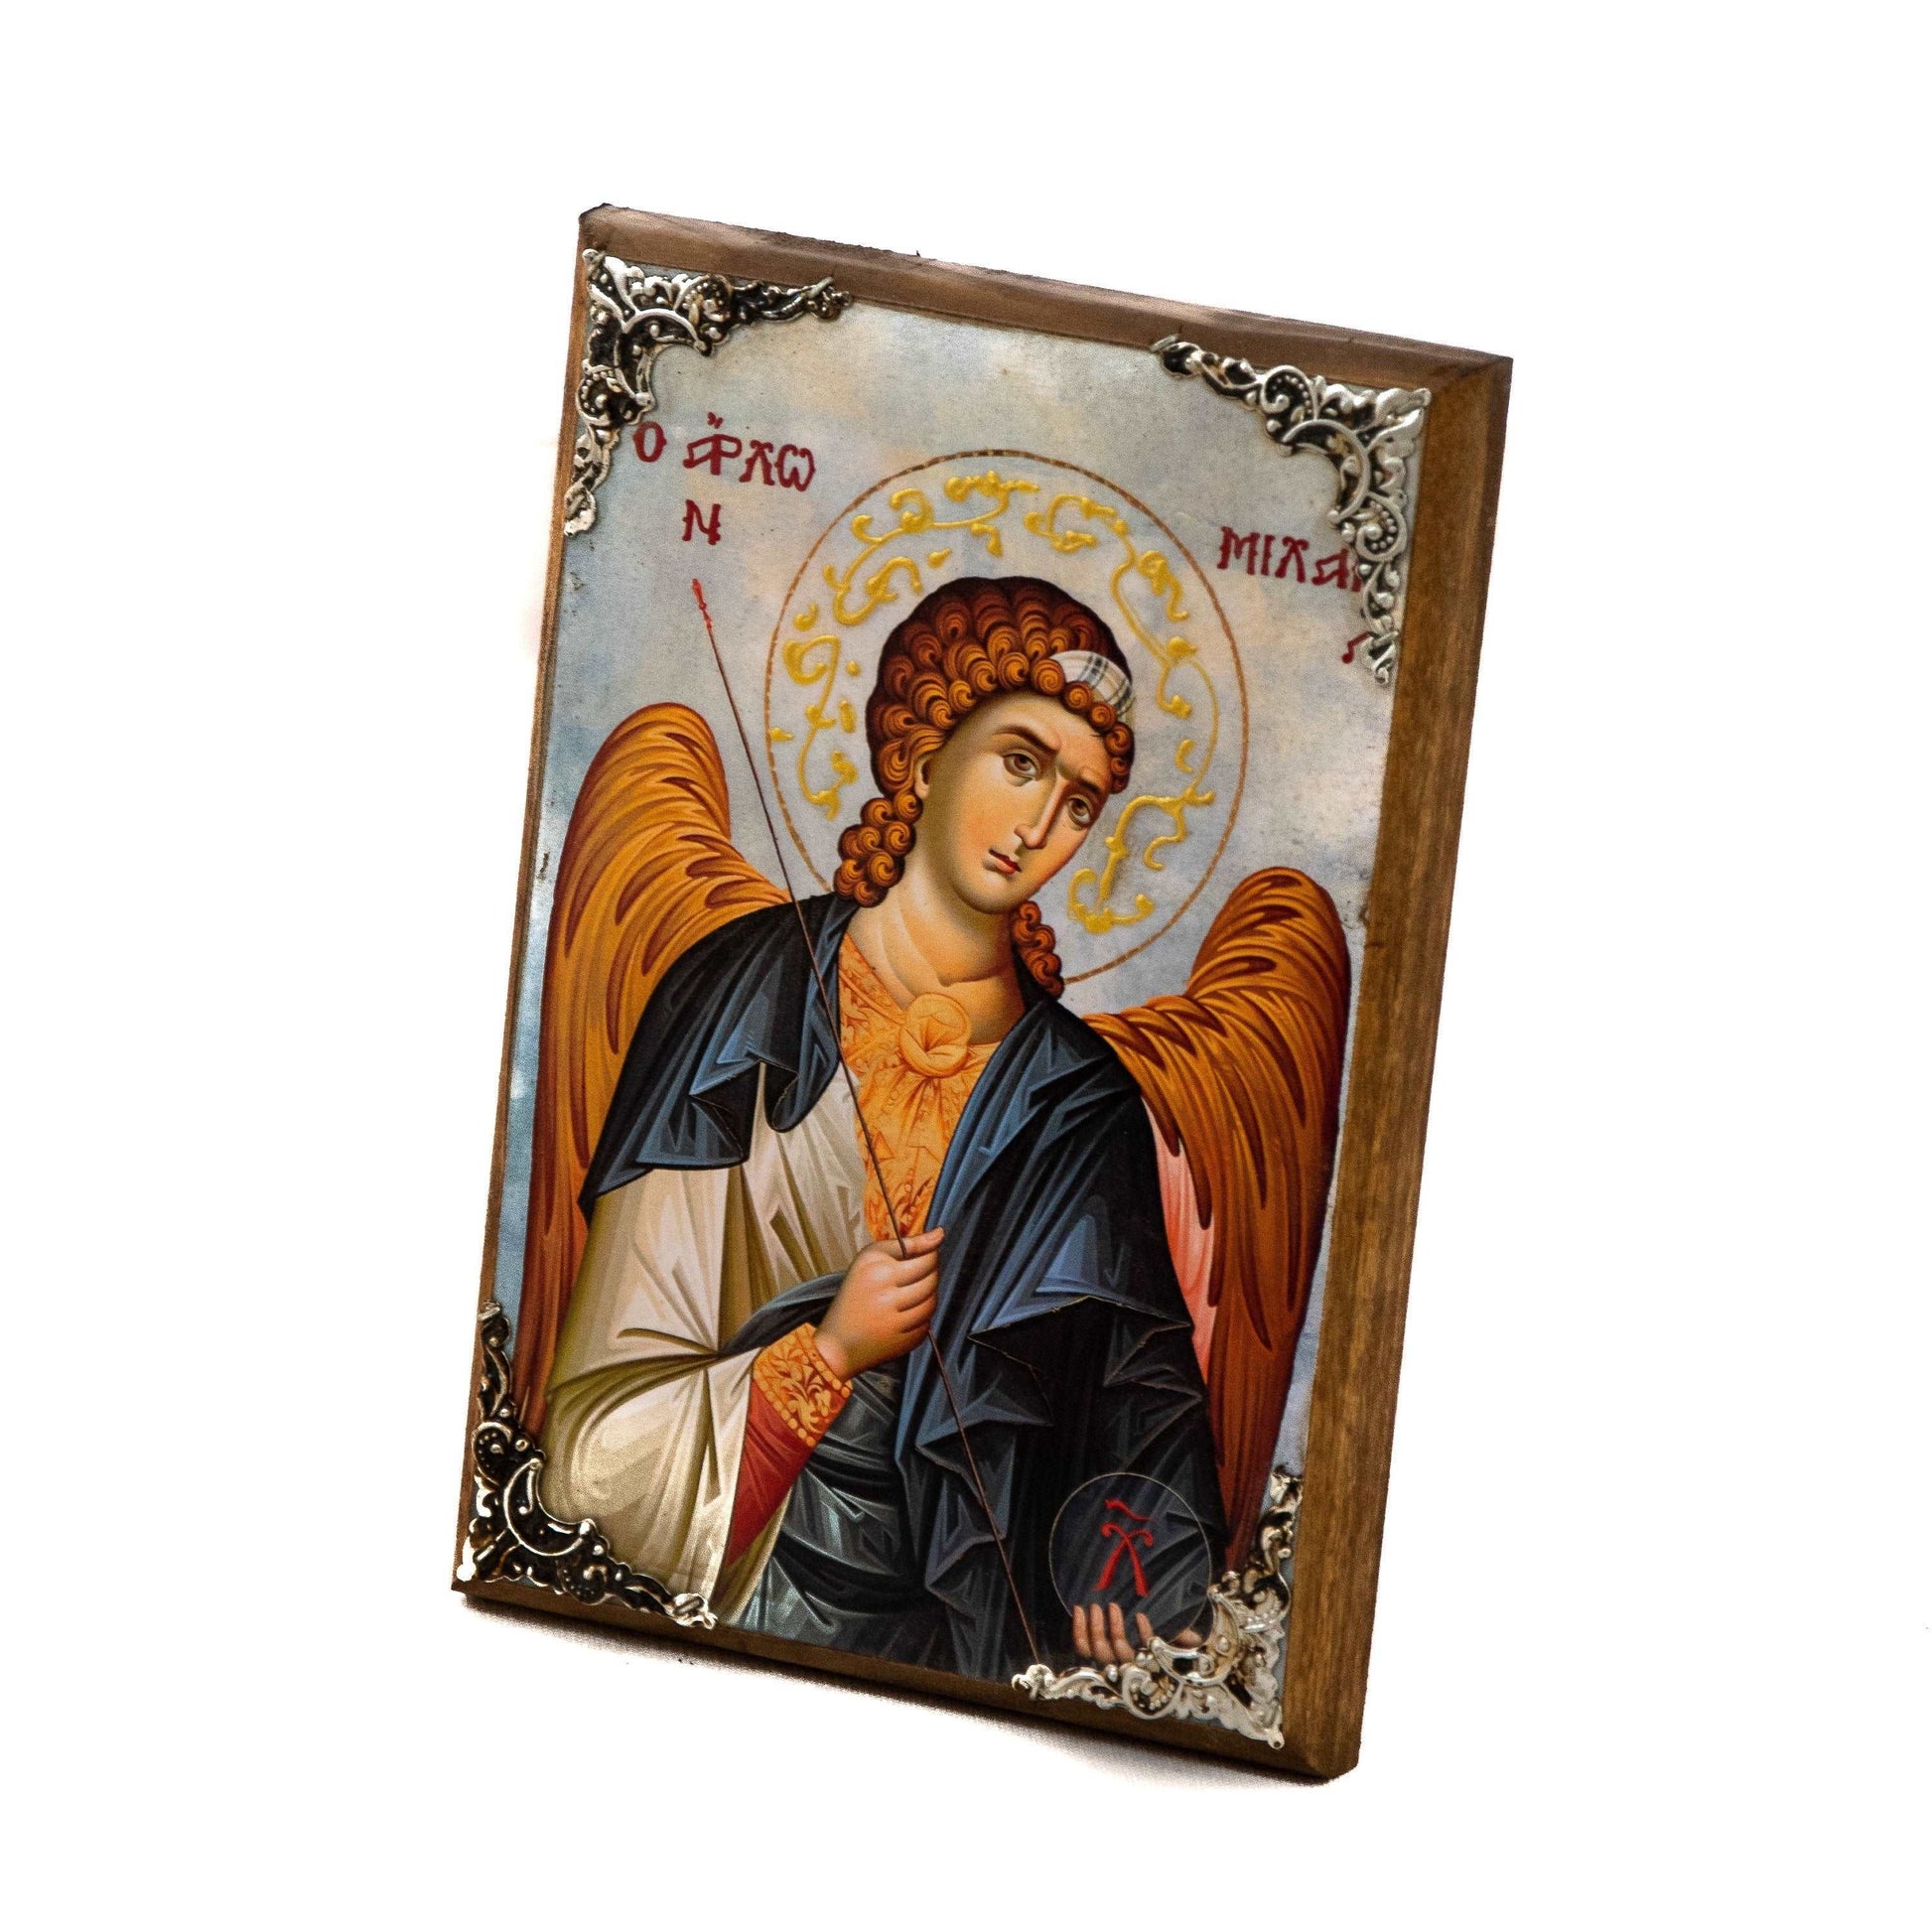 Archangel Michael icon, Handmade Greek Orthodox icon of St Michael, Byzantine art wall hanging on wood plaque religious icon, religious gift TheHolyArt